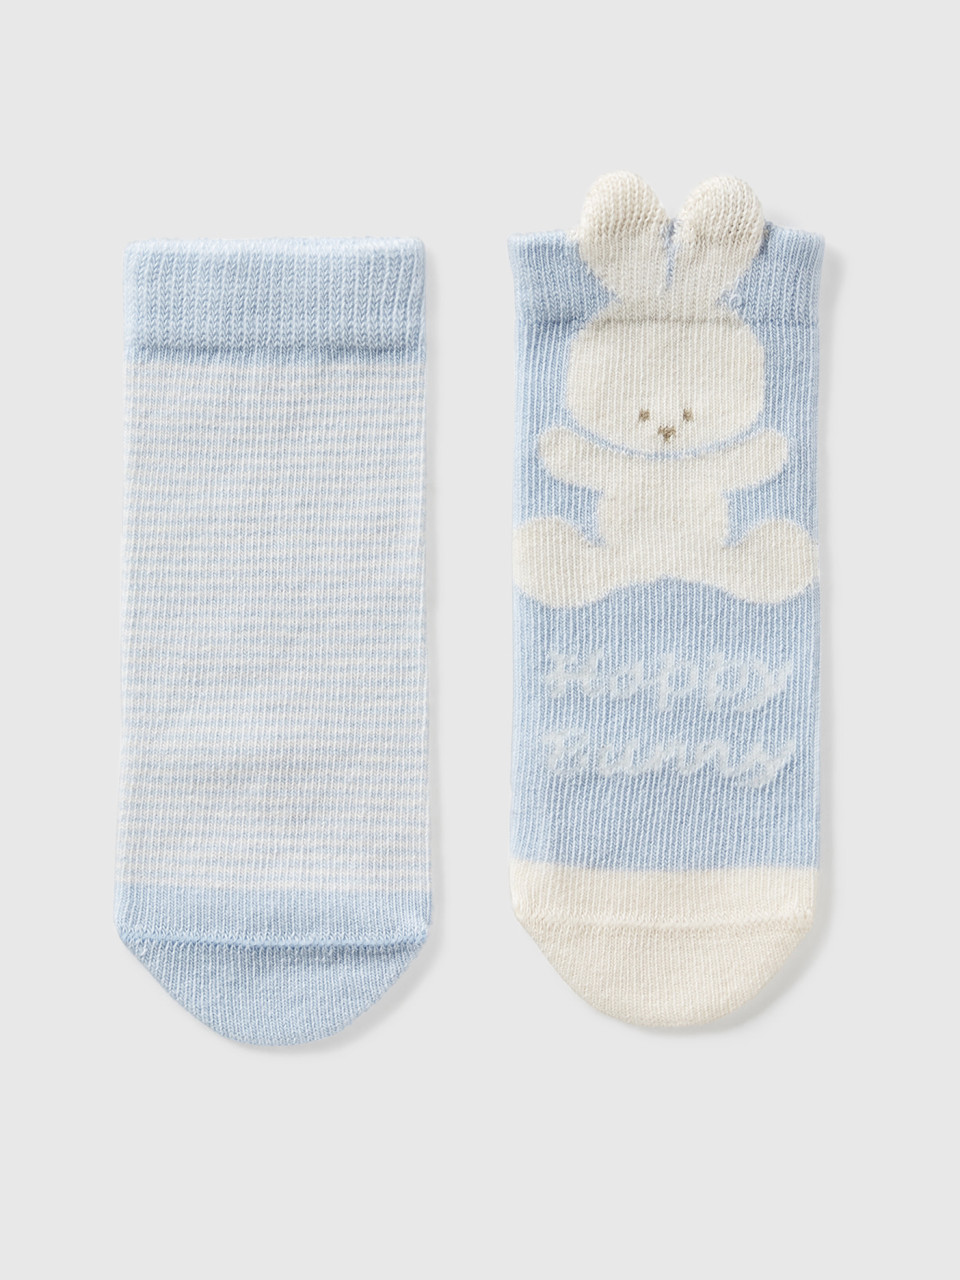 Benetton, Sock Set With Stripes And Bunny, Sky Blue, Kids